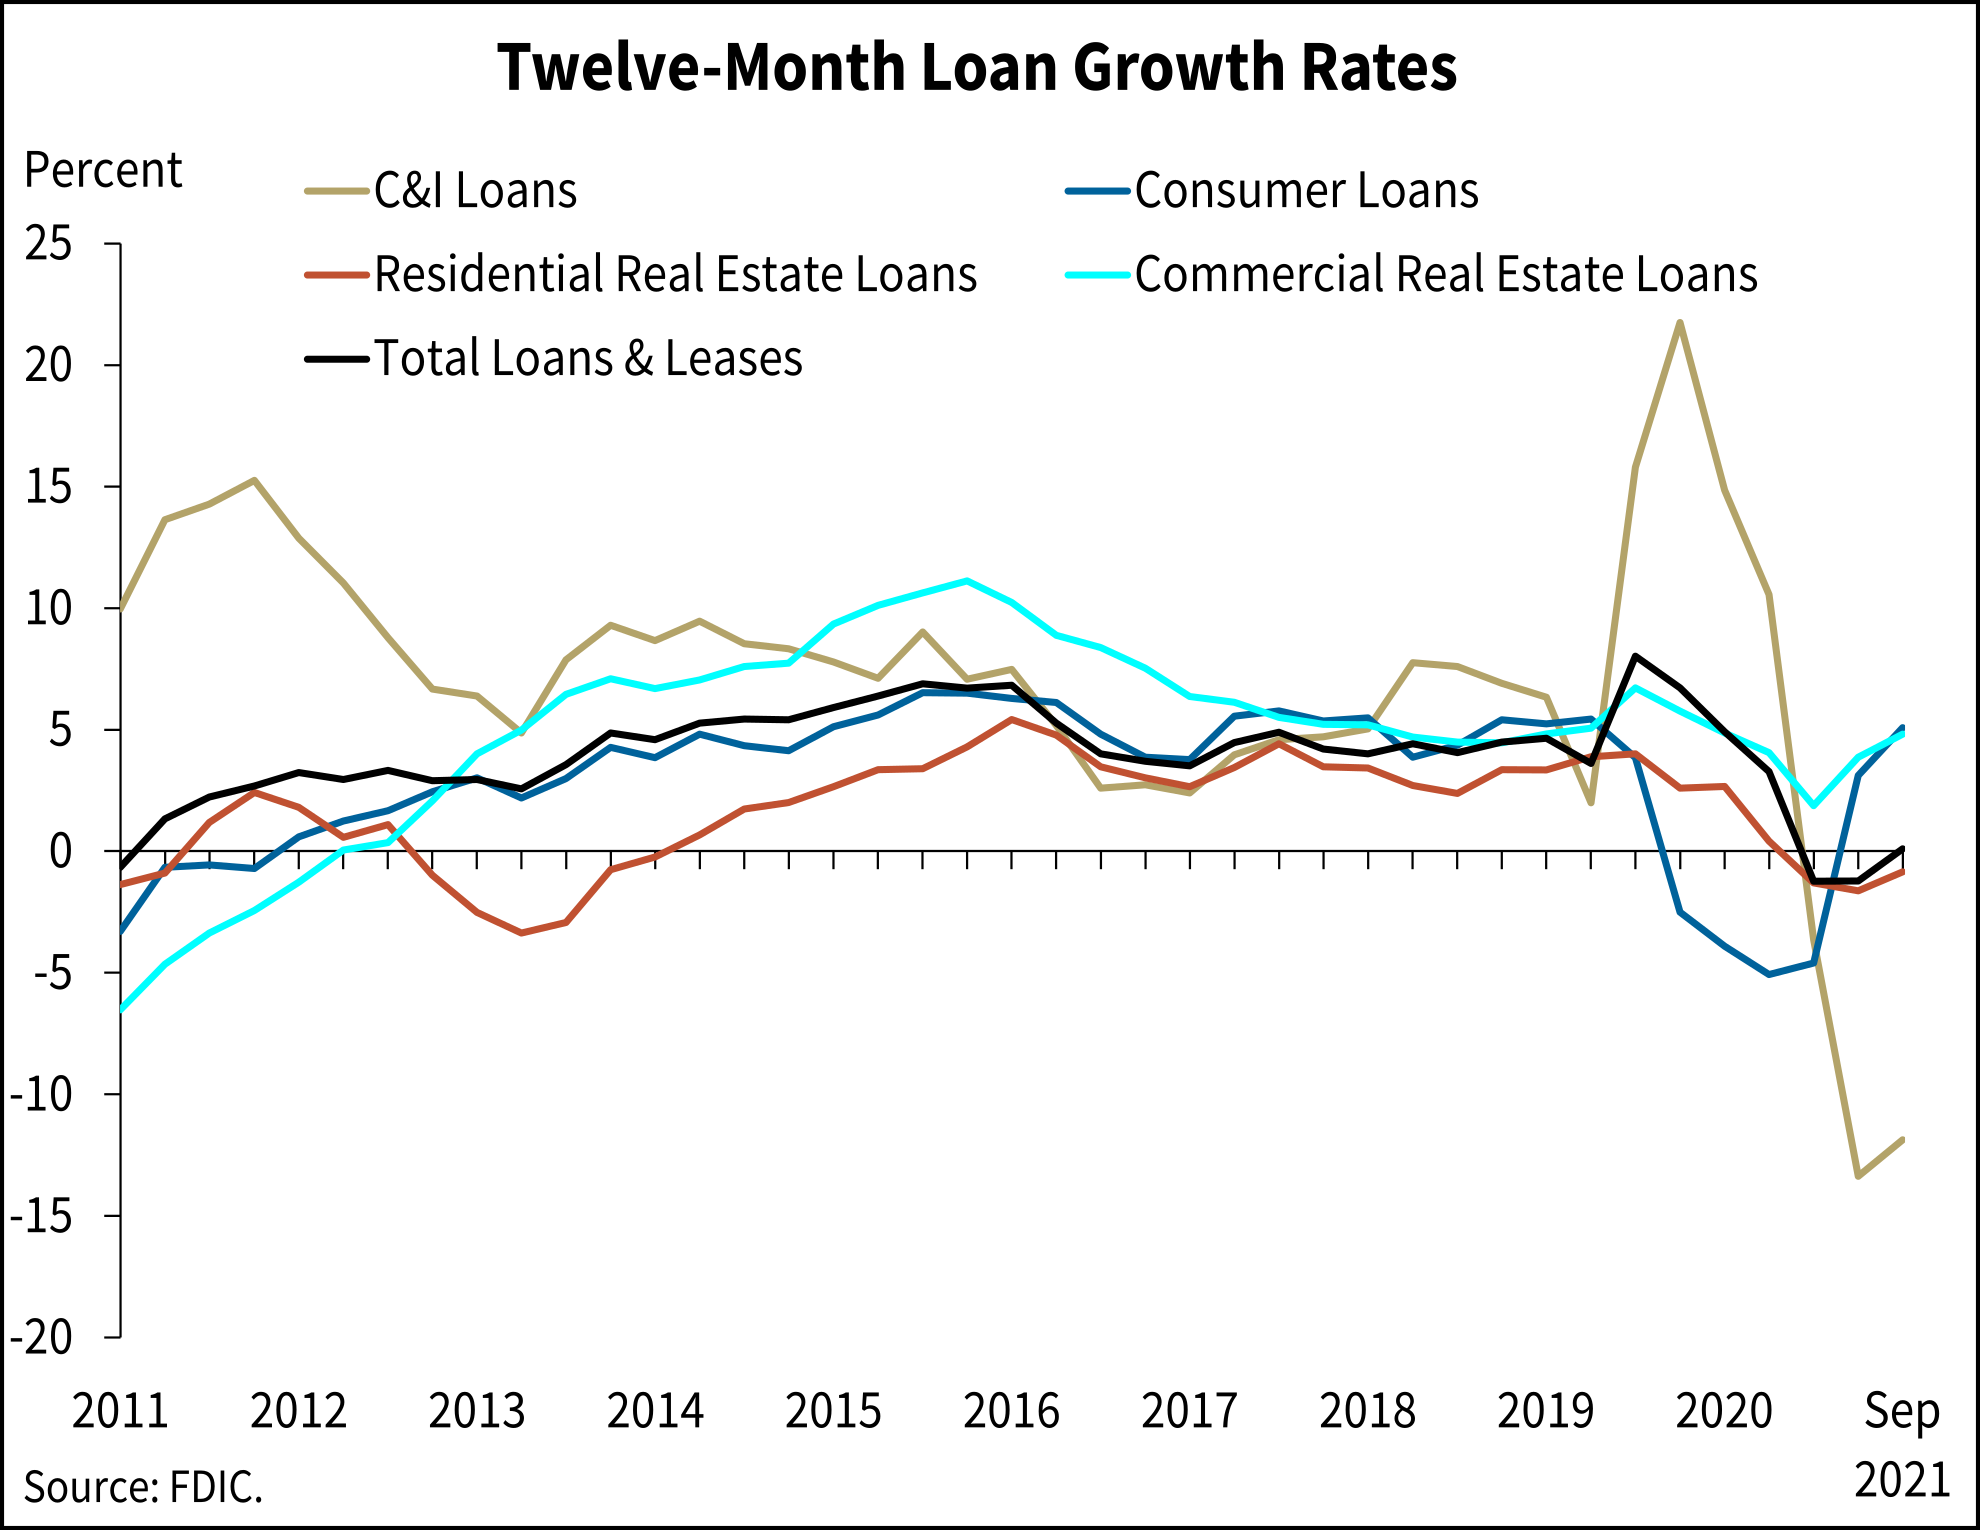 Chart showing Twelve-Month Loan Growth Rates from 2011 to September 2021, including commercial and industrial (C&I) loans, consumer loans, residential real estate loans, commercial real estate loans, and total loans & leases. Source: FDIC